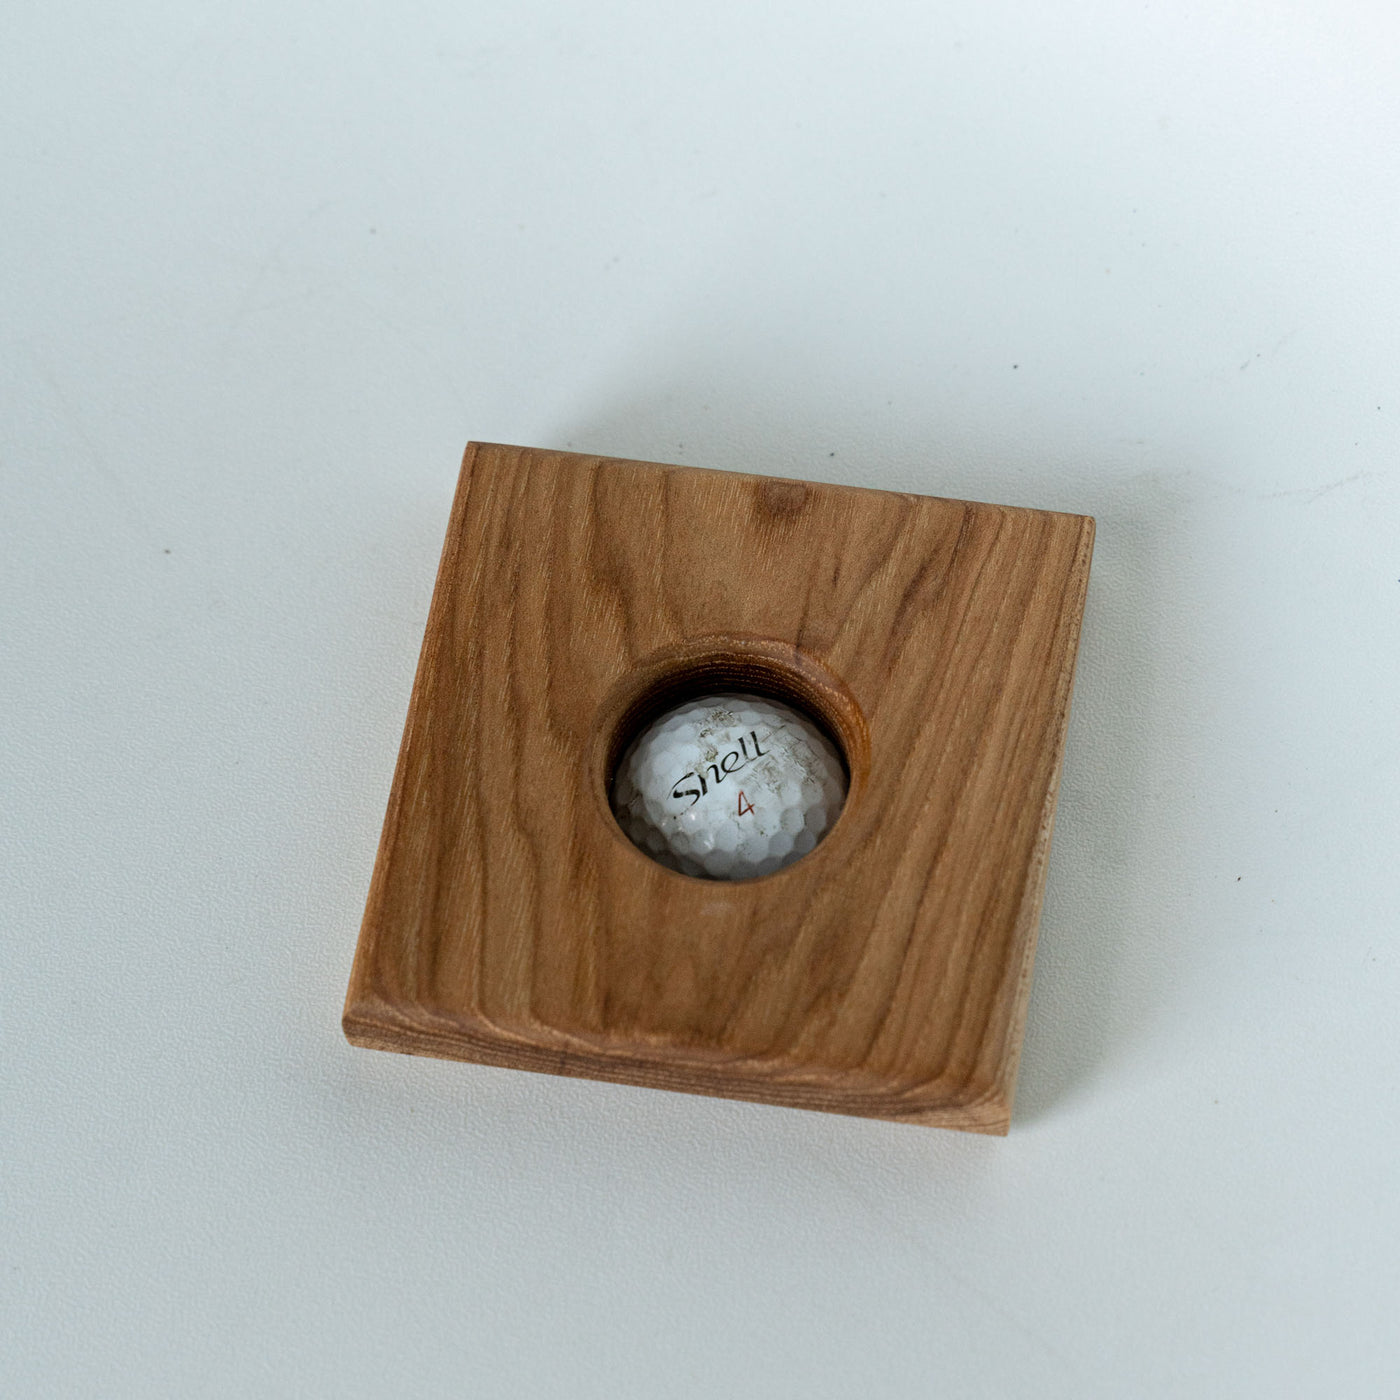 Snell 4 // Recycled Golf Ball Coaster